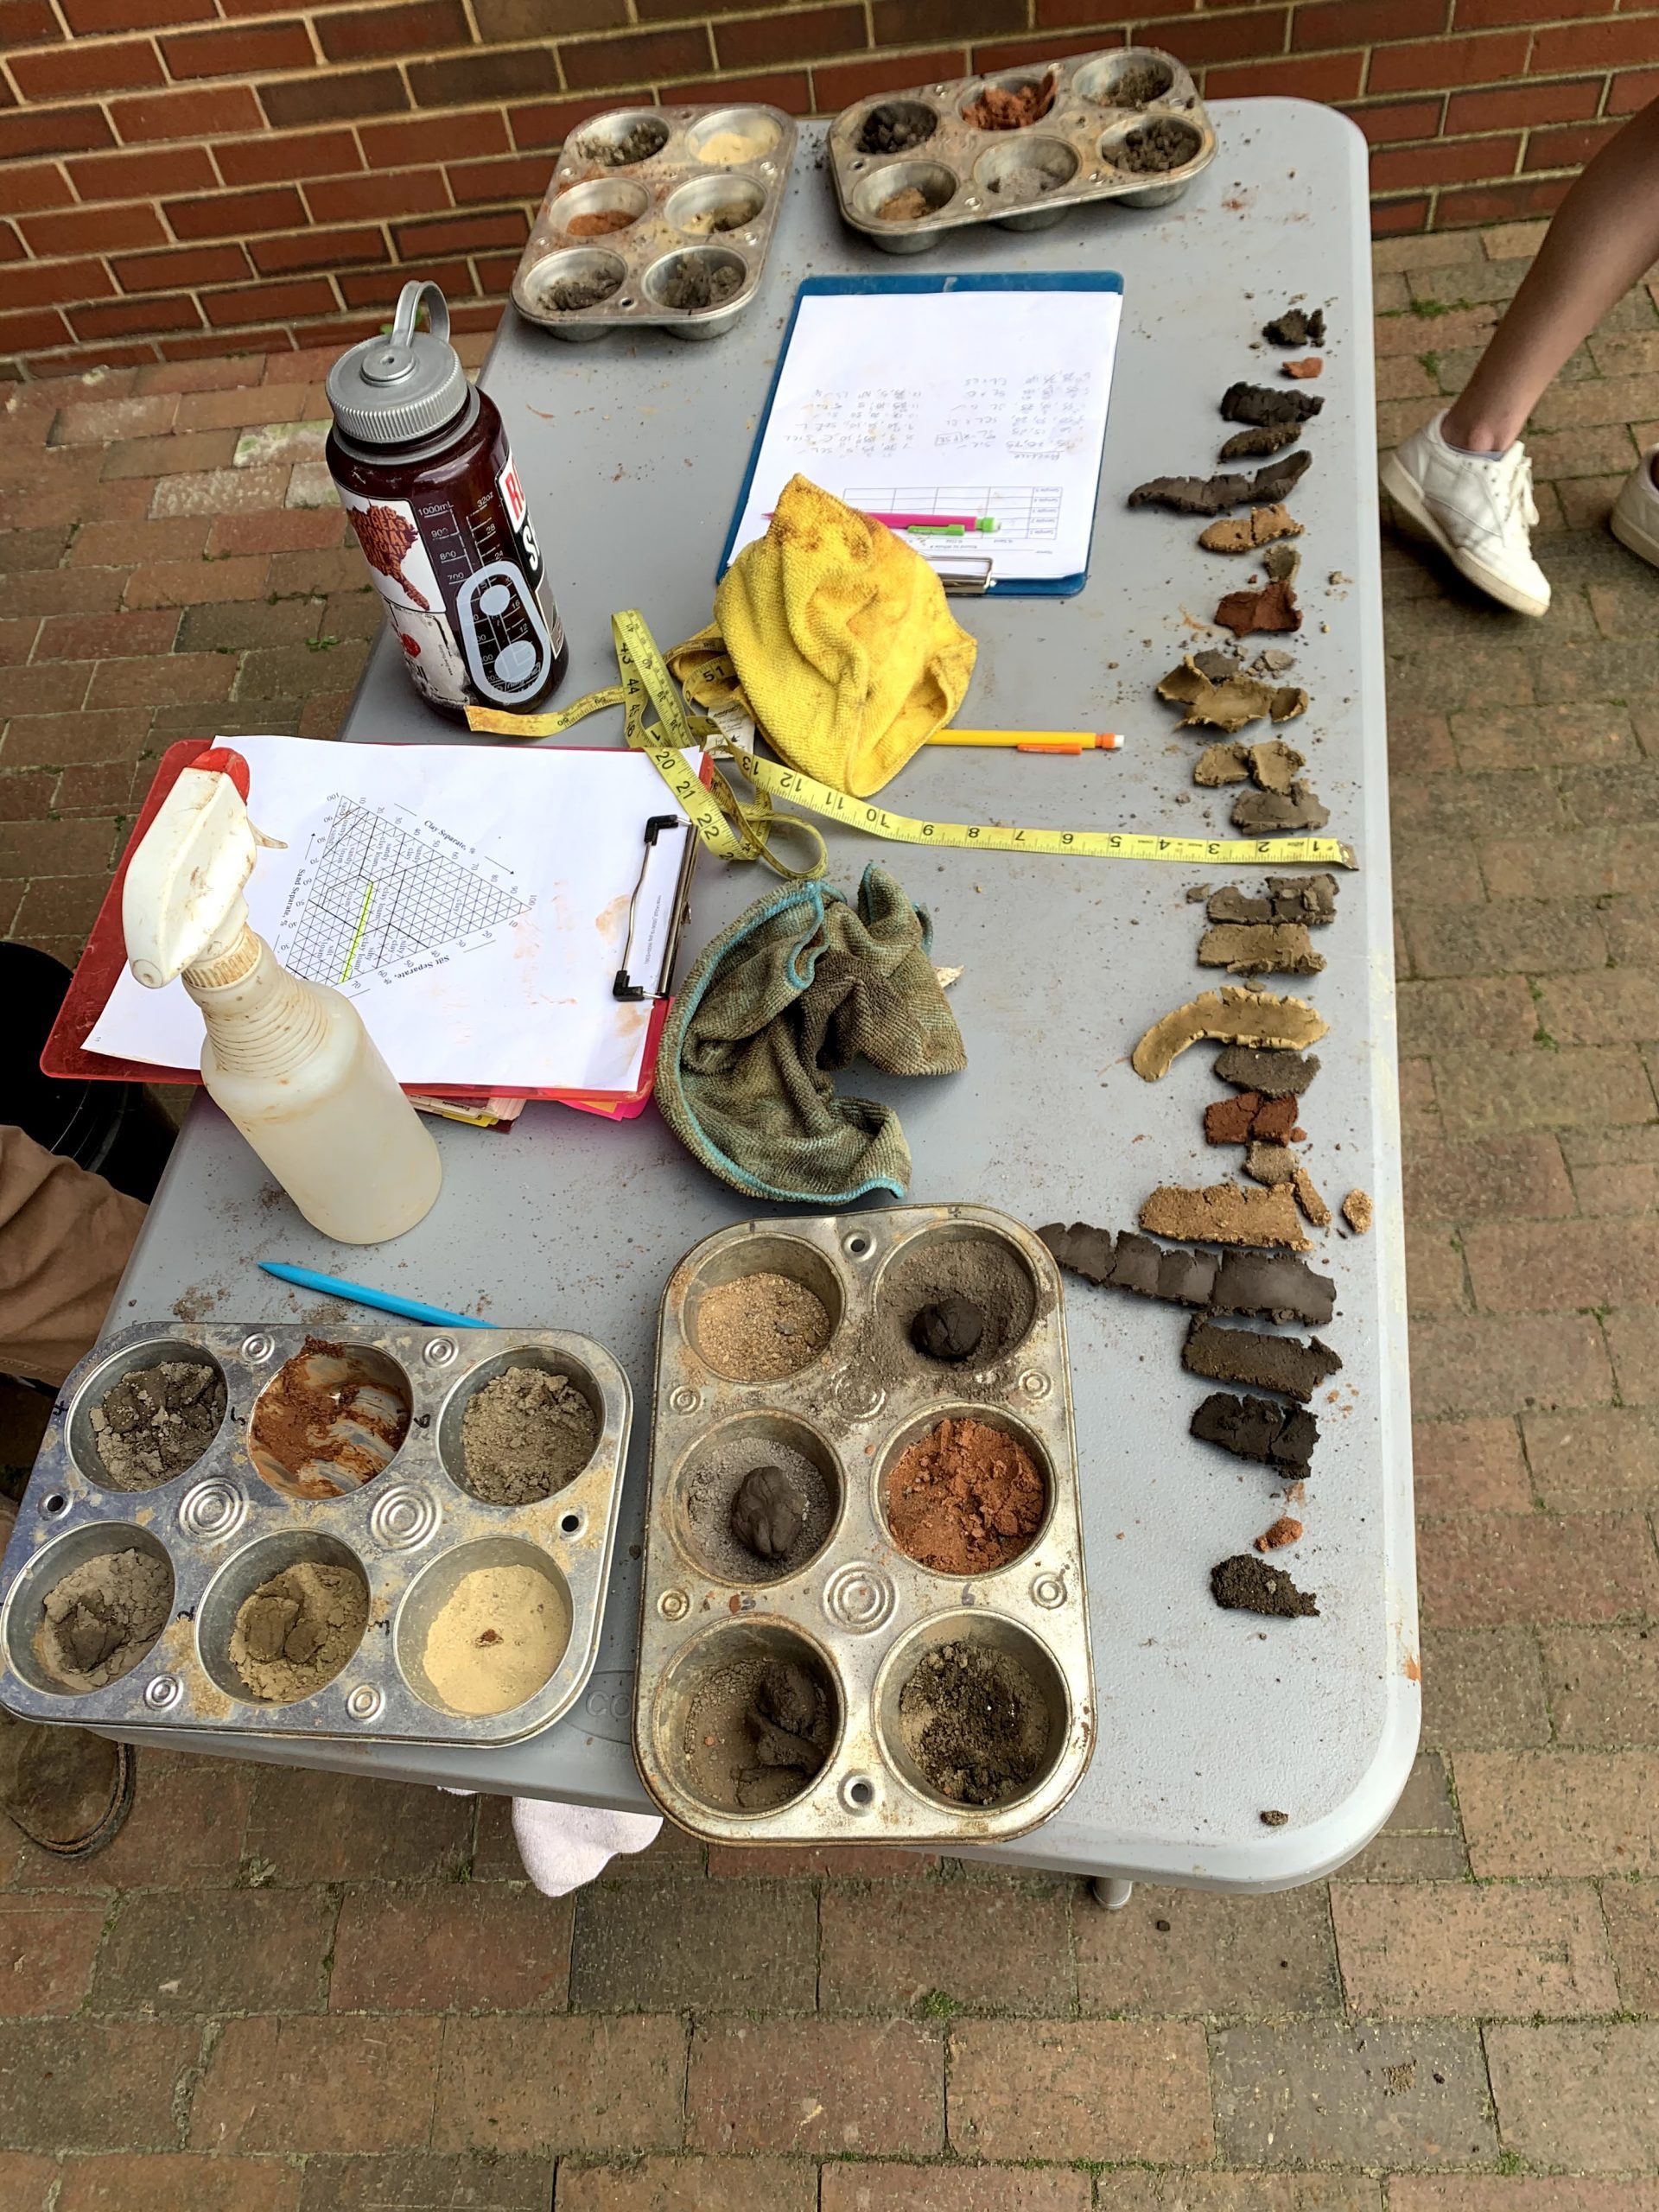 soil judging tools and samples on a table